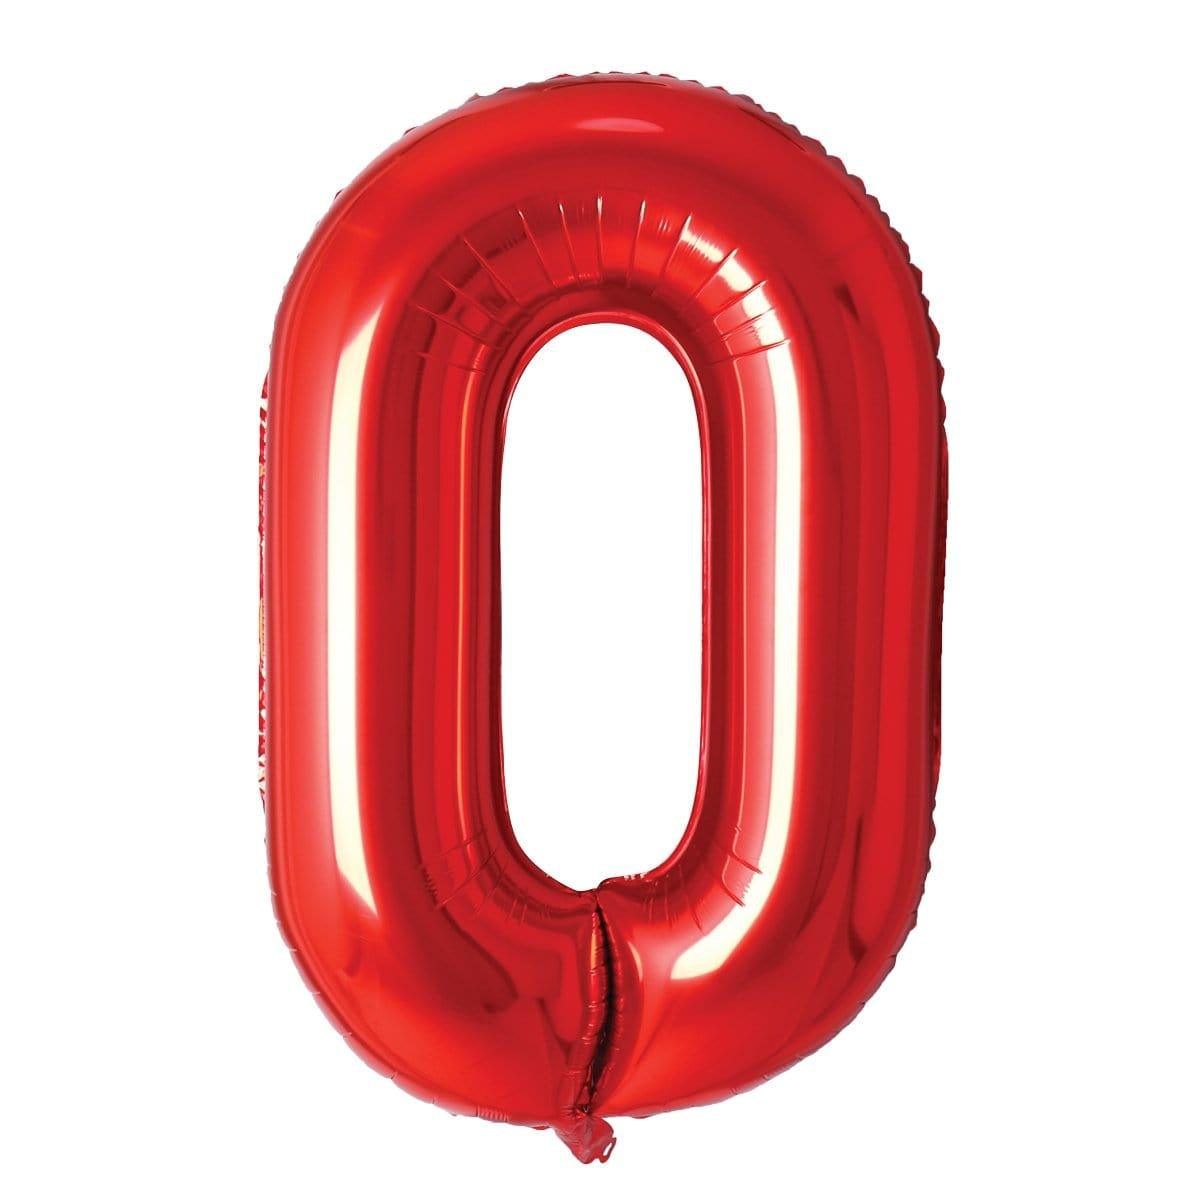 Buy Balloons Red Number 0 Foil Balloon, 34 Inches sold at Party Expert